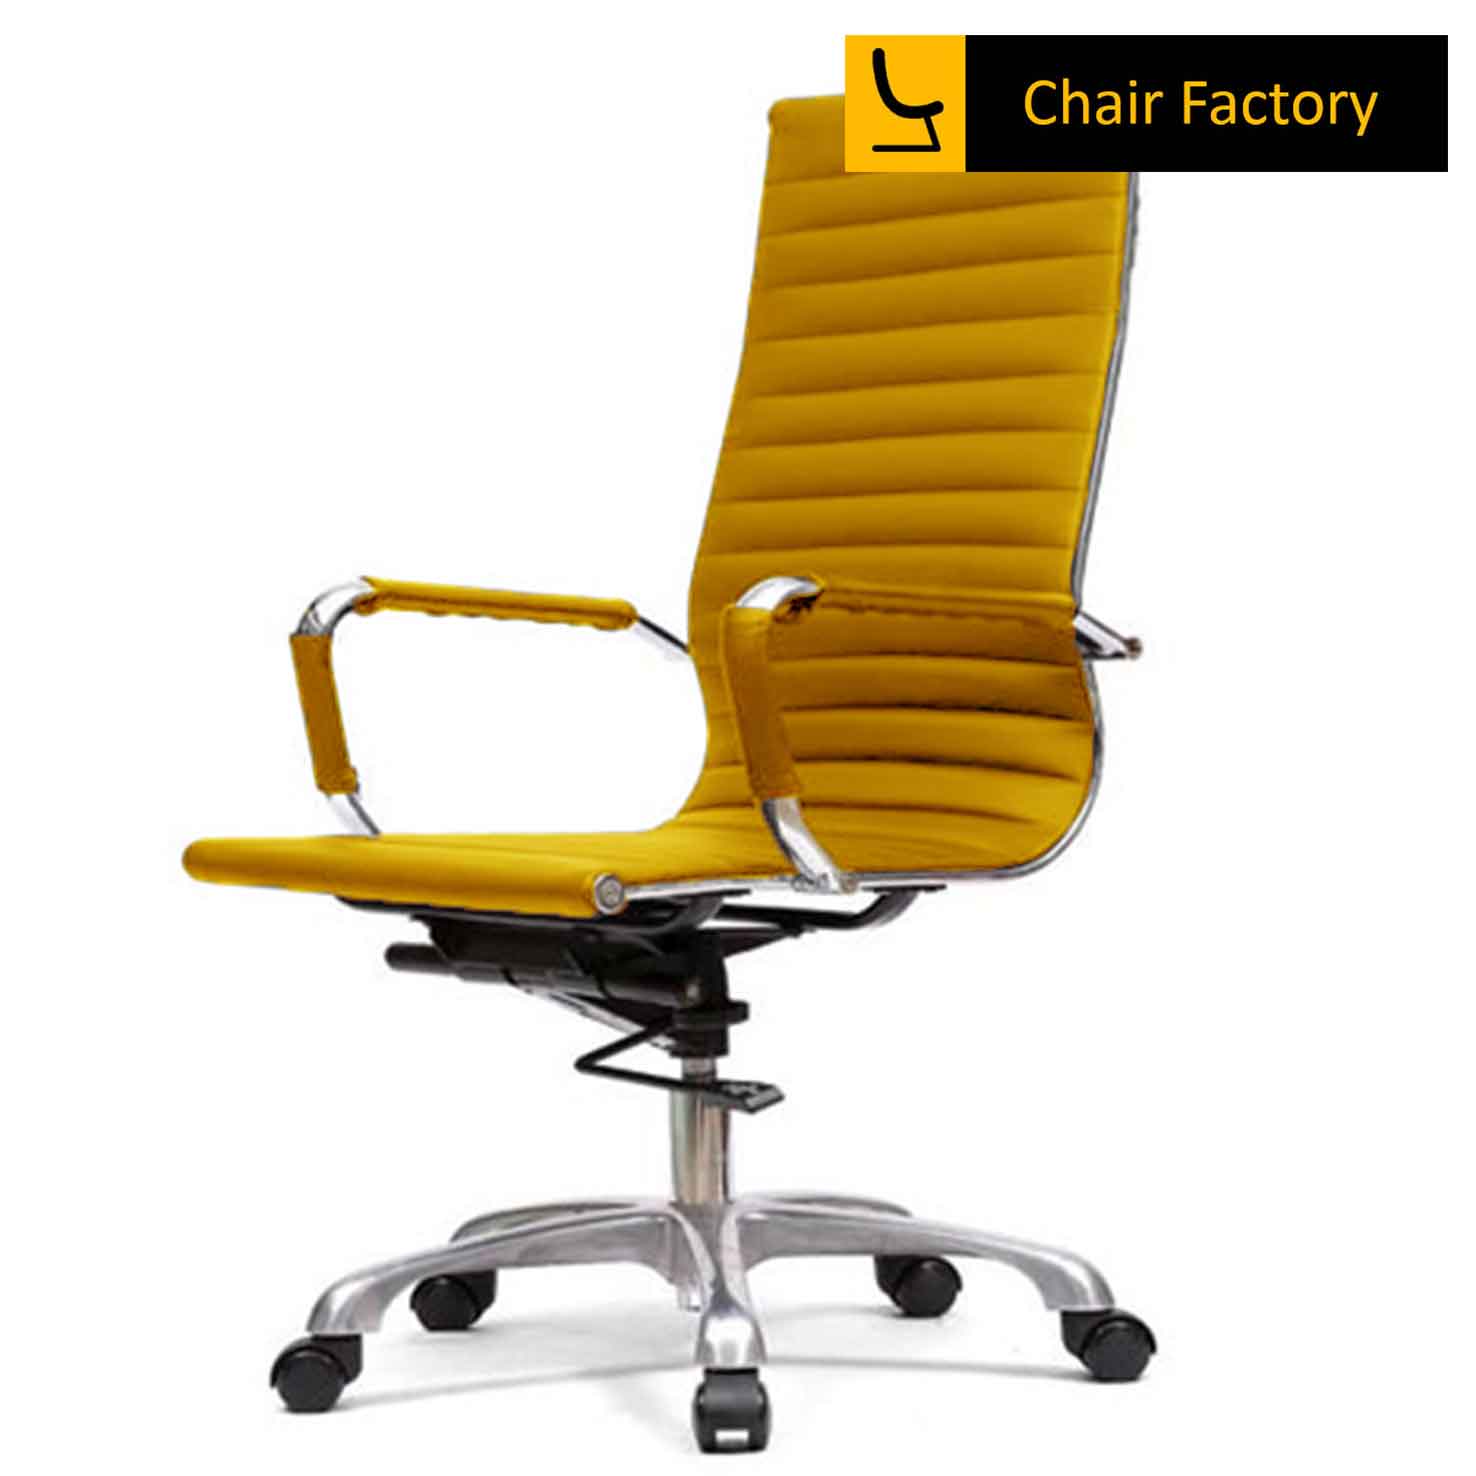 James Single Cushion High Back conference Room Chair